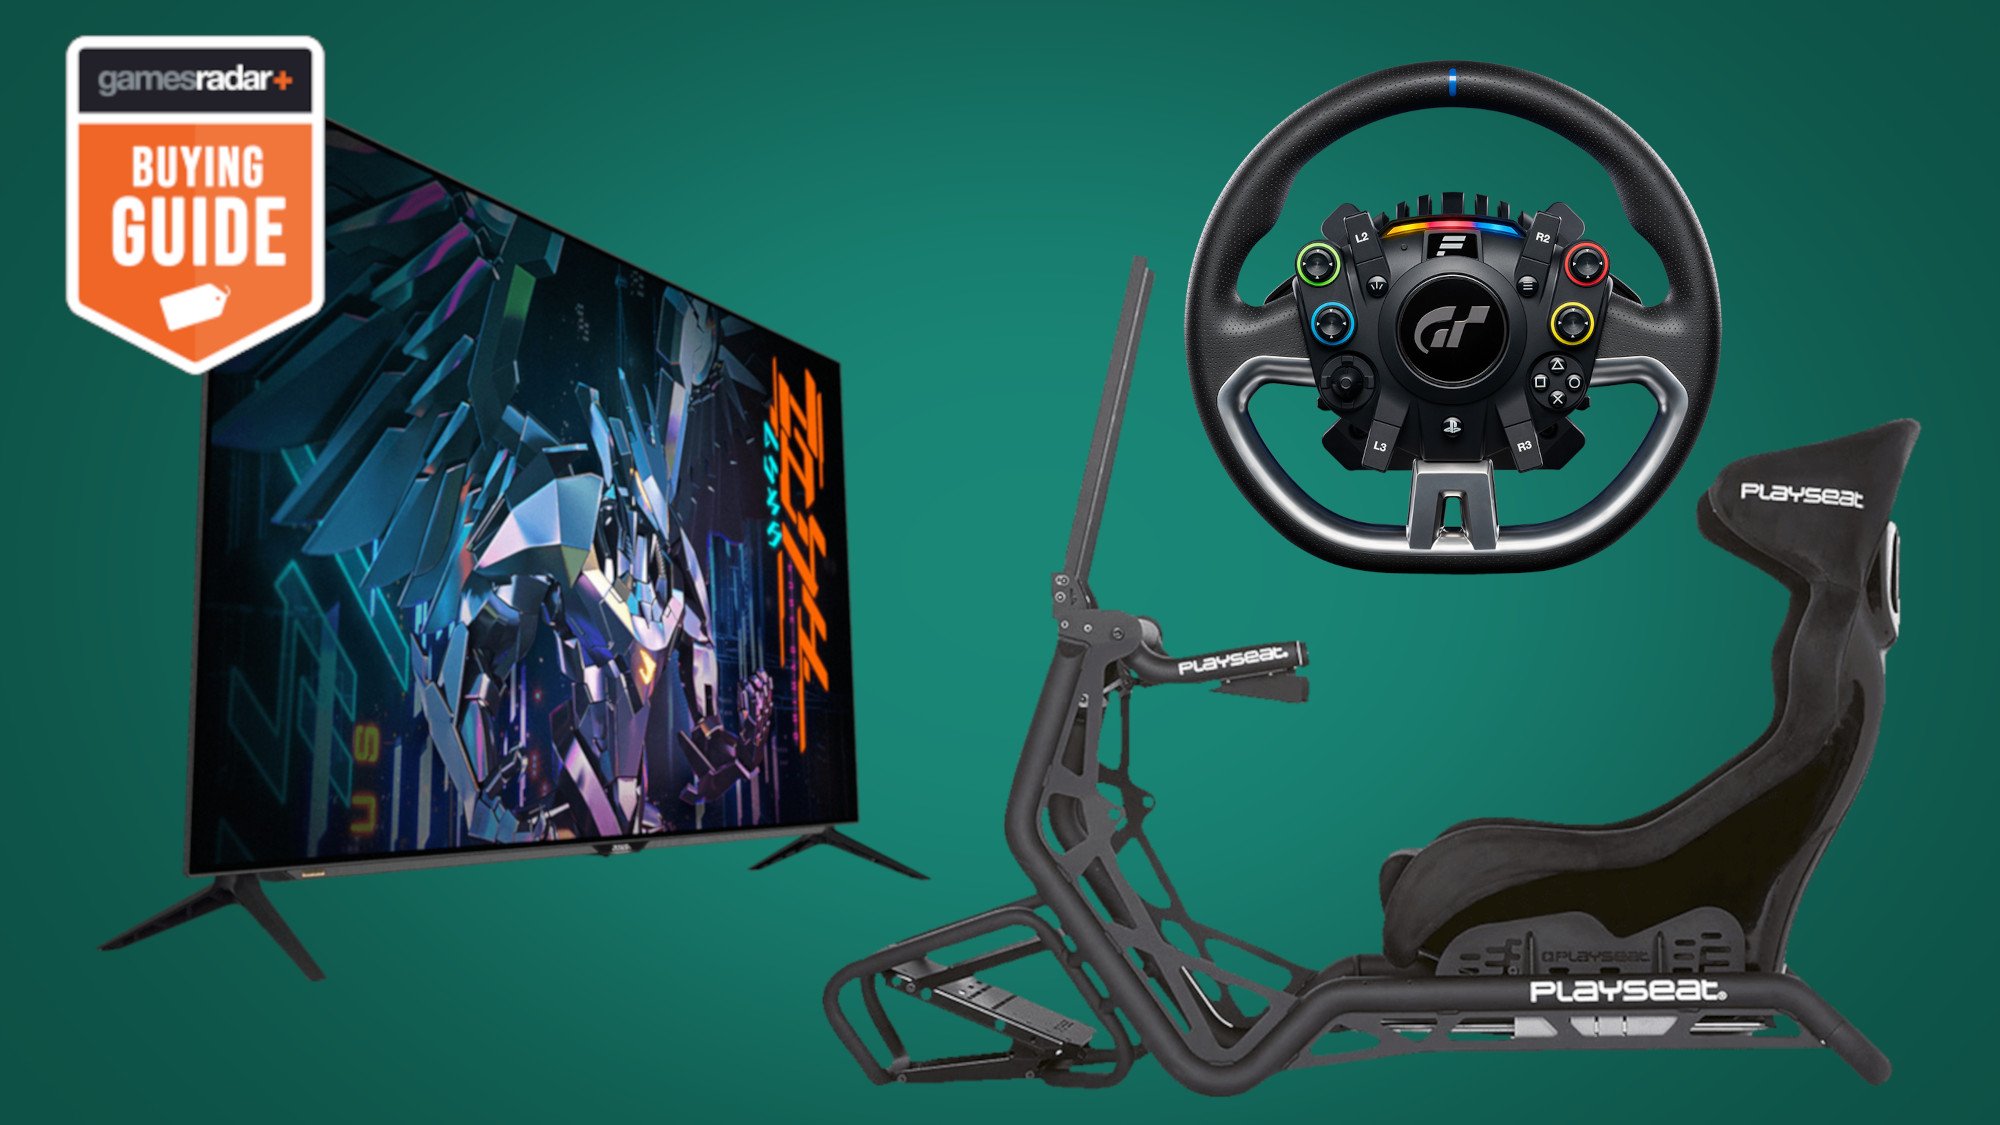 This is the ultimate Gran Turismo 7 setup